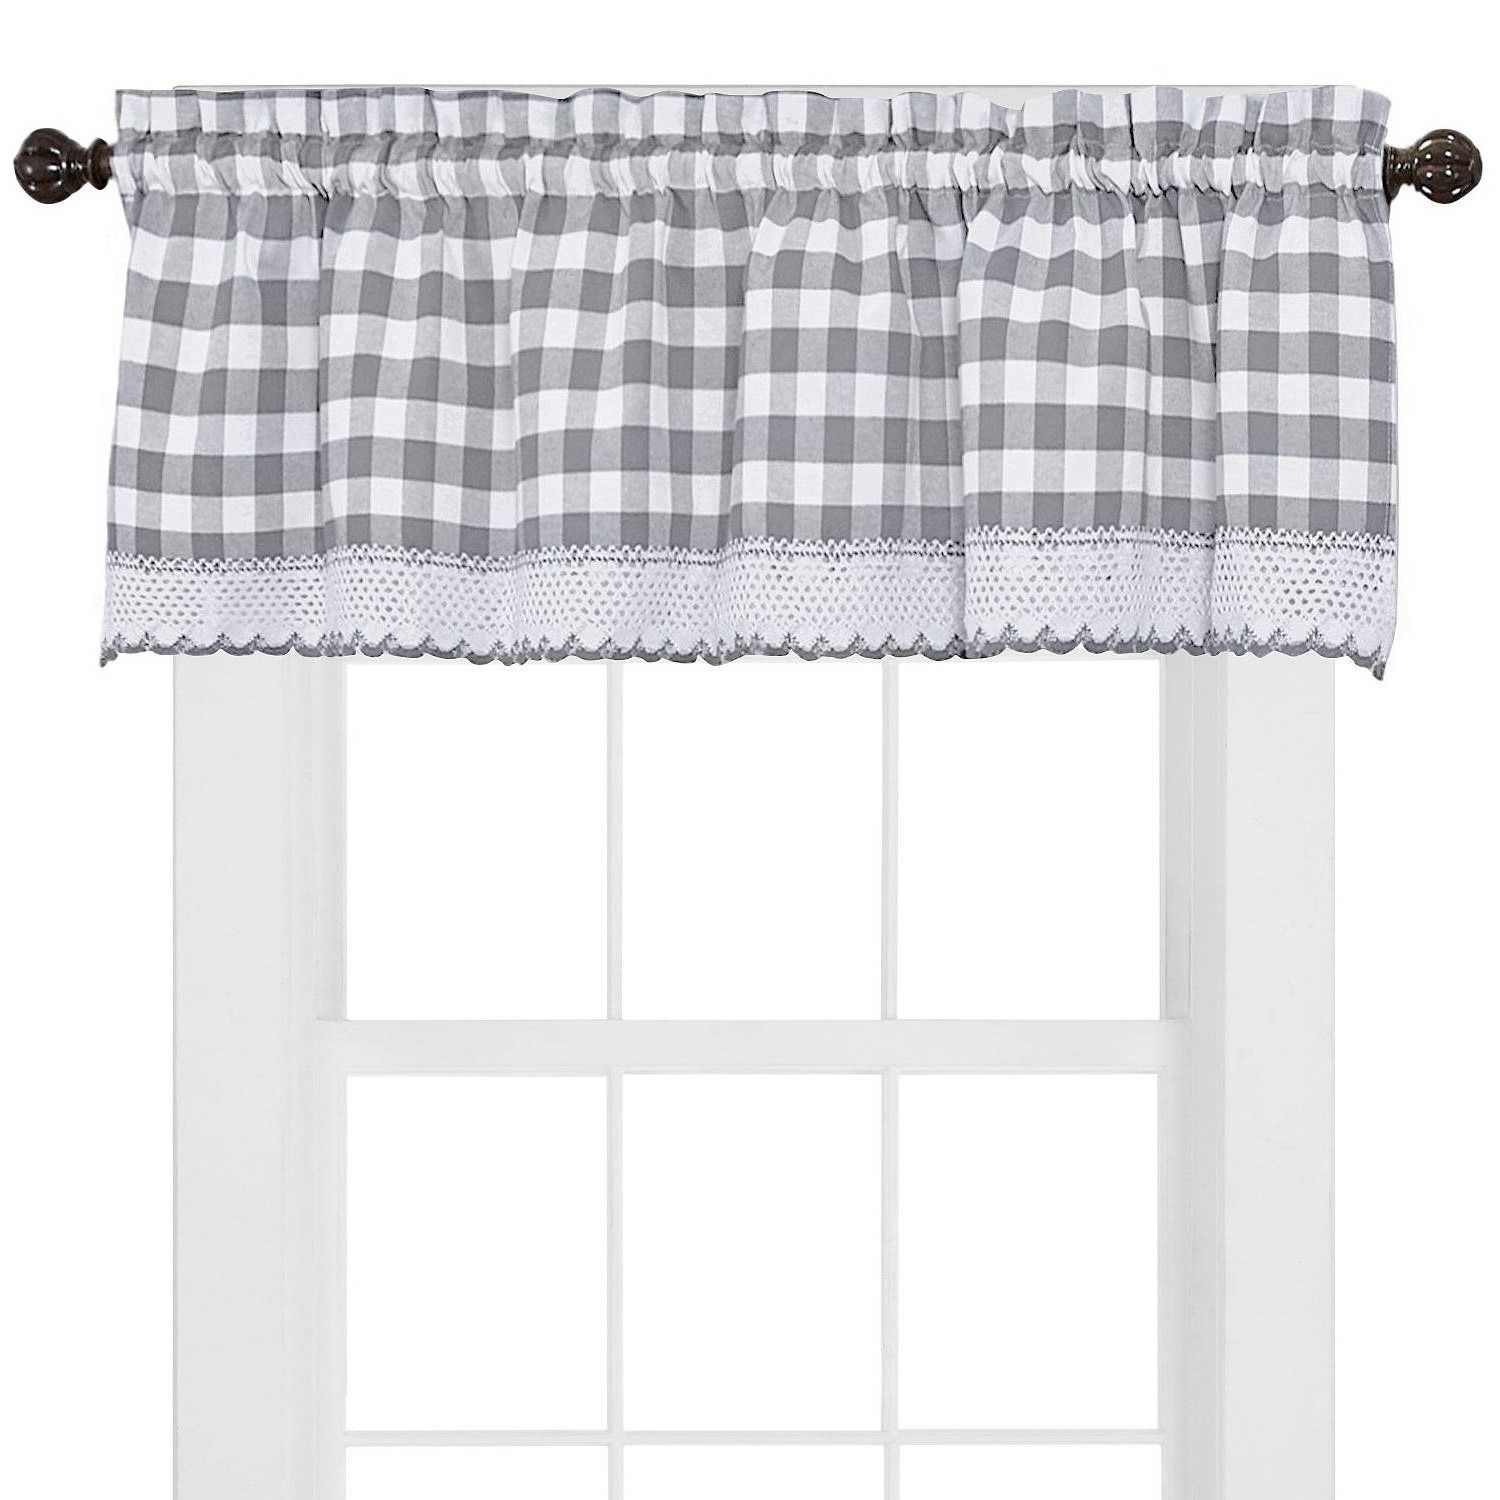 Favorite Buffalo Check Cotton Blend Grey Kitchen Curtain Valance Inside Cotton Blend Grey Kitchen Curtain Tiers (View 2 of 20)